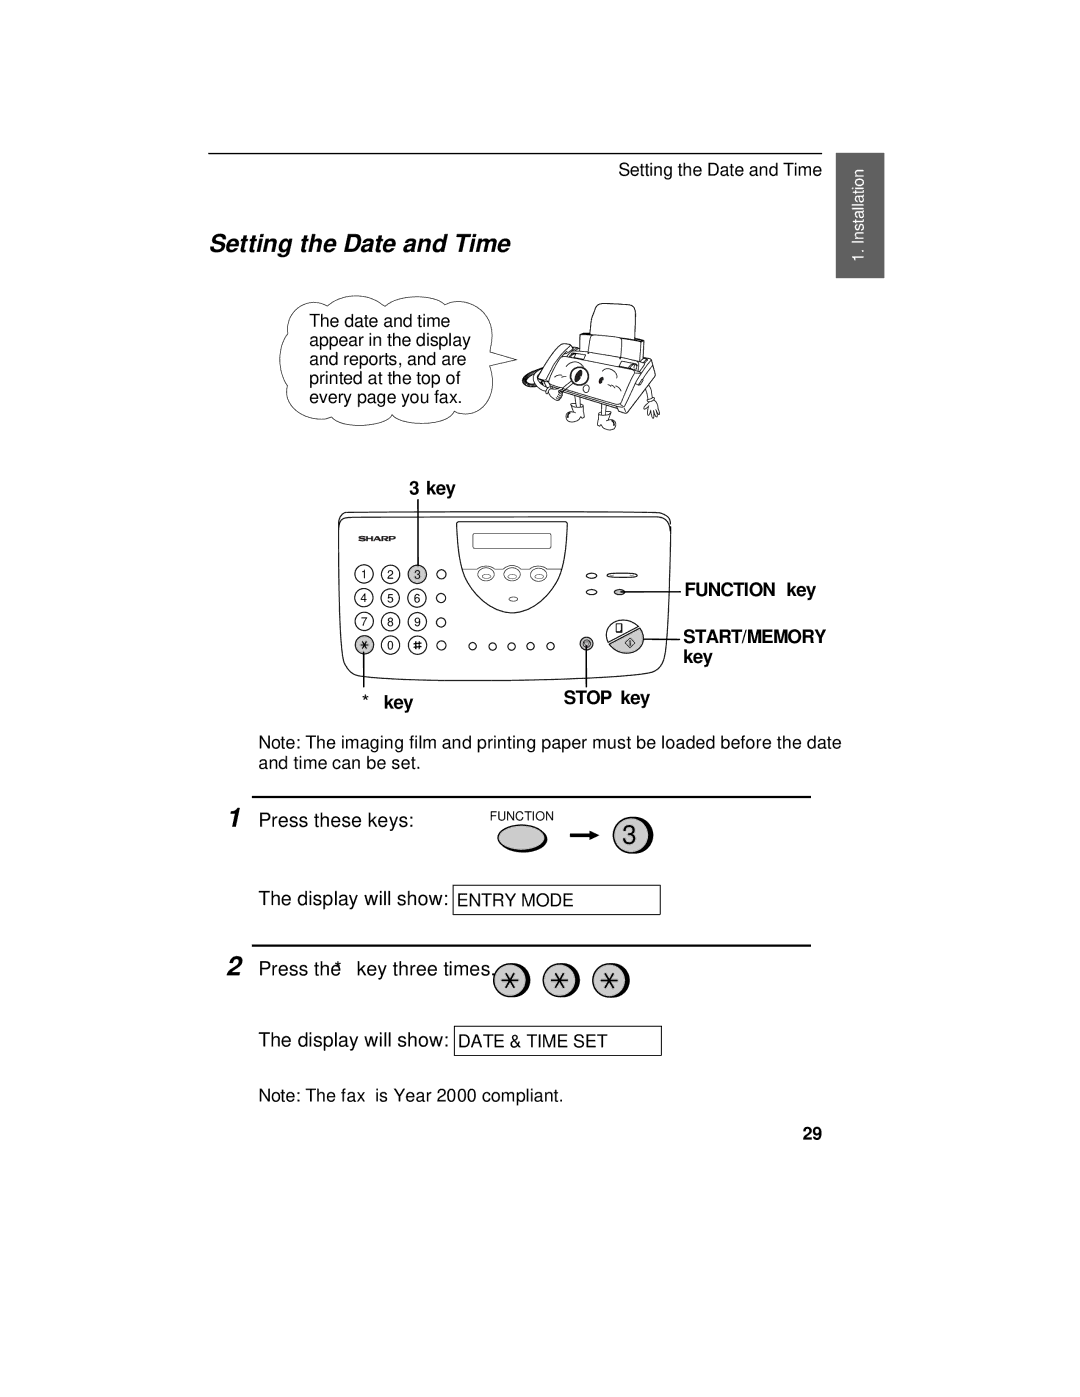 Sharp UX-470 operation manual Setting the Date and Time, START/MEMORY key 